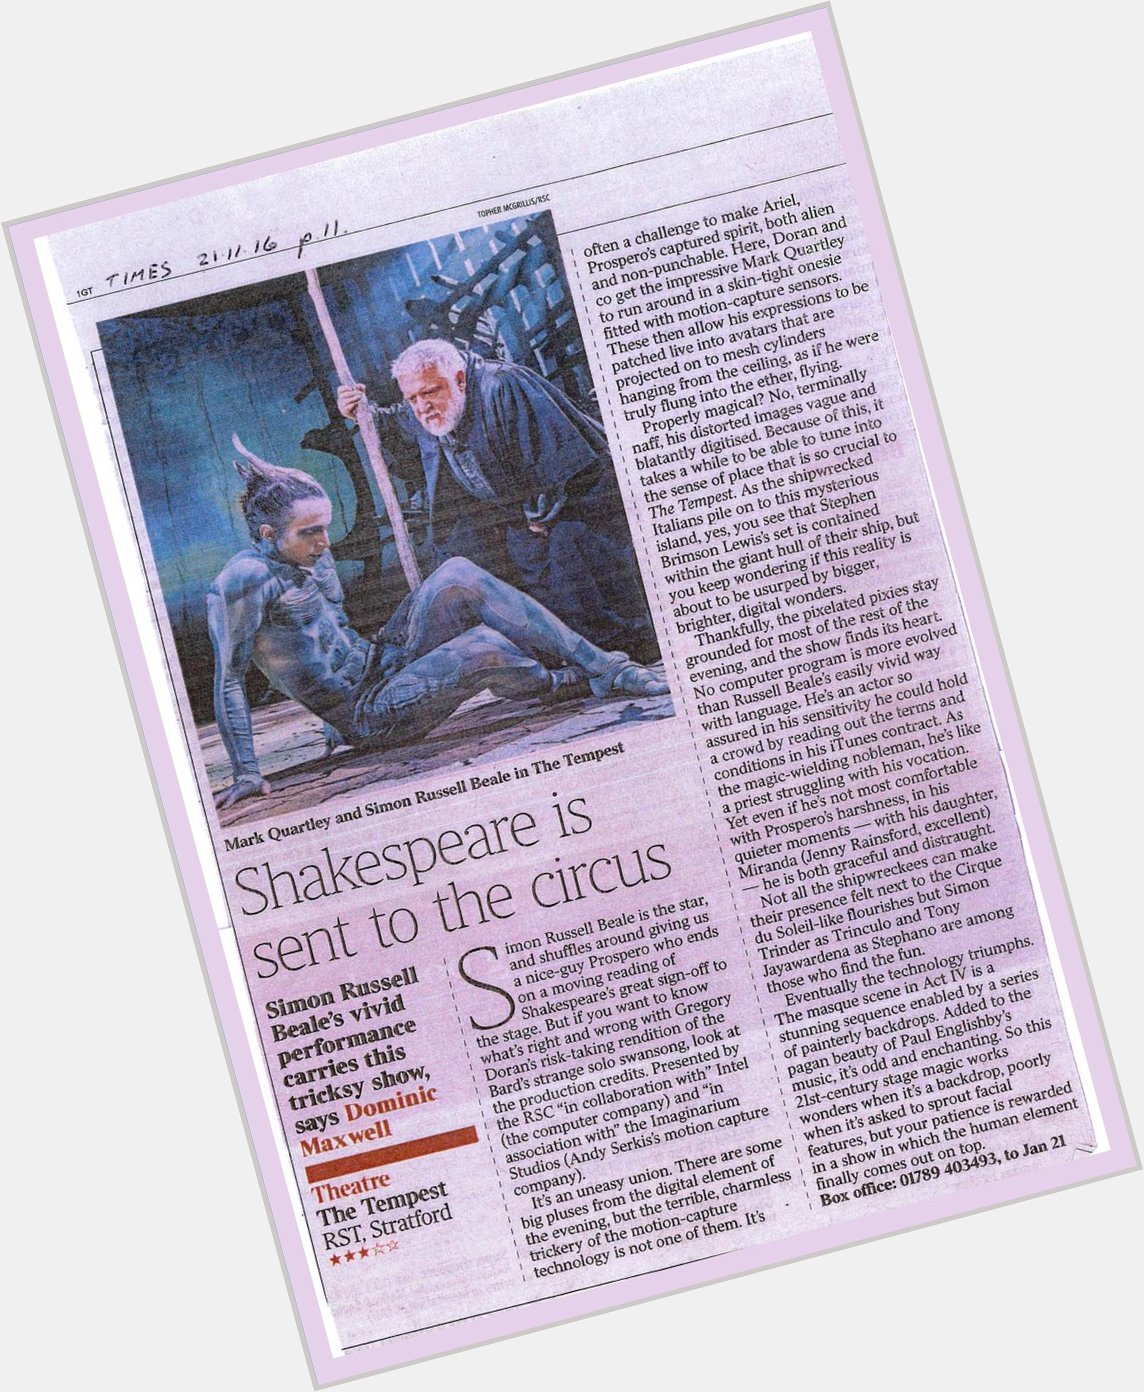 Happy Birthday Simon Russell Beale currently Prospero . Article from the library\s news cuttings archive. 